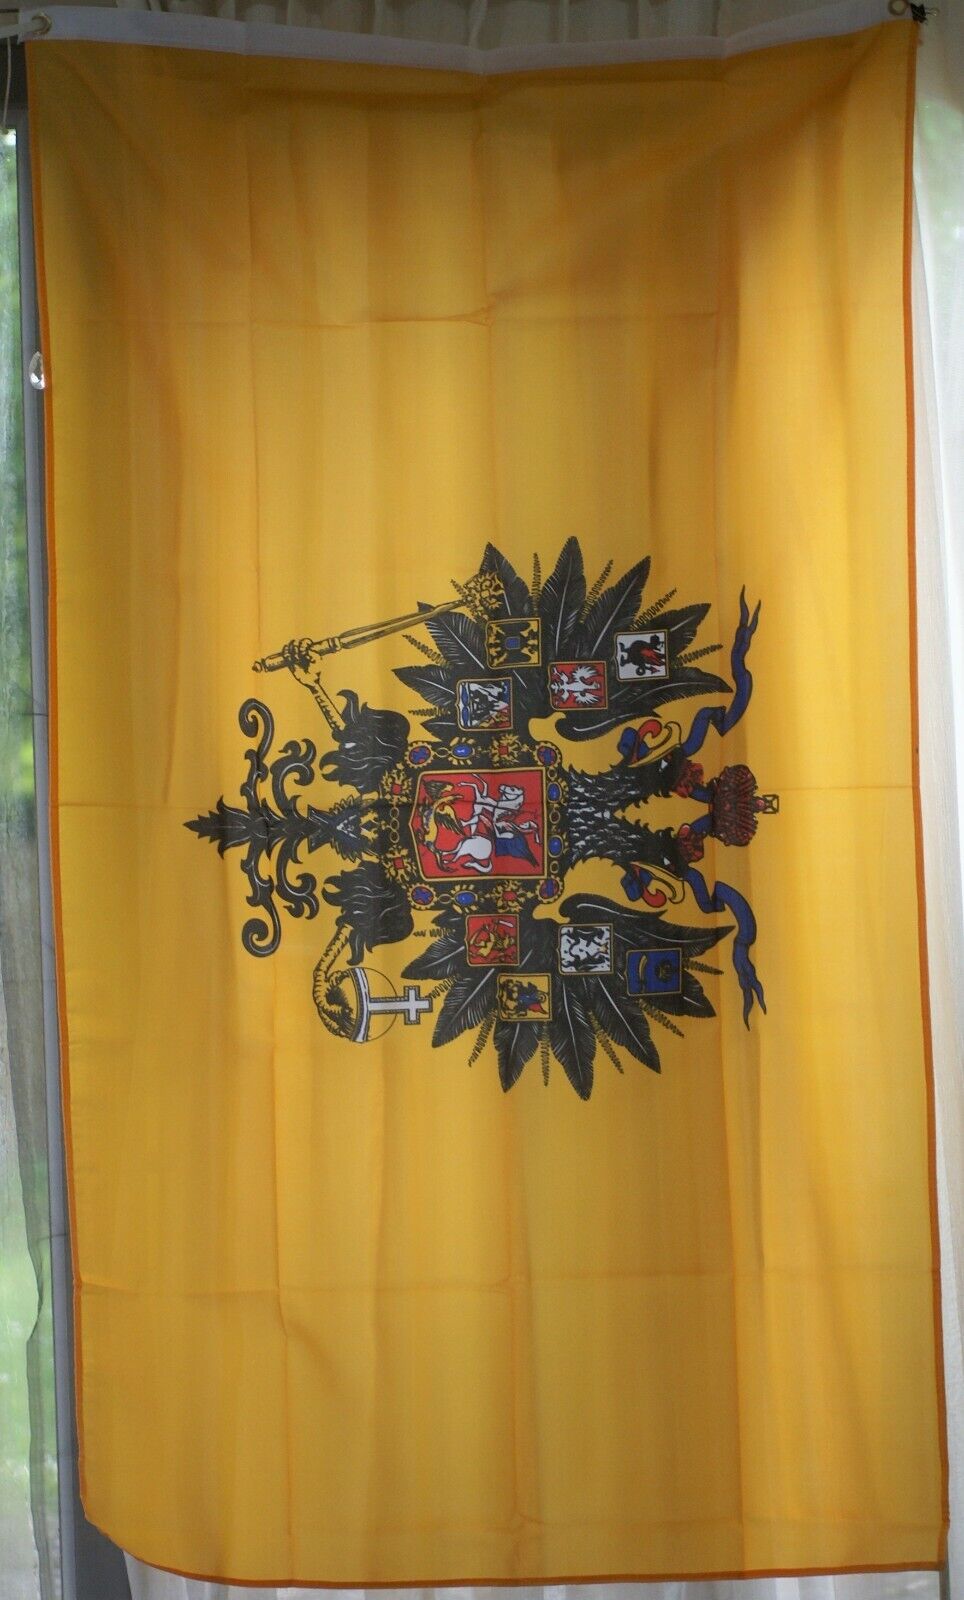 Replica Imperial Russian Tsarist state eagle flag, 5 x 3 feet large size 